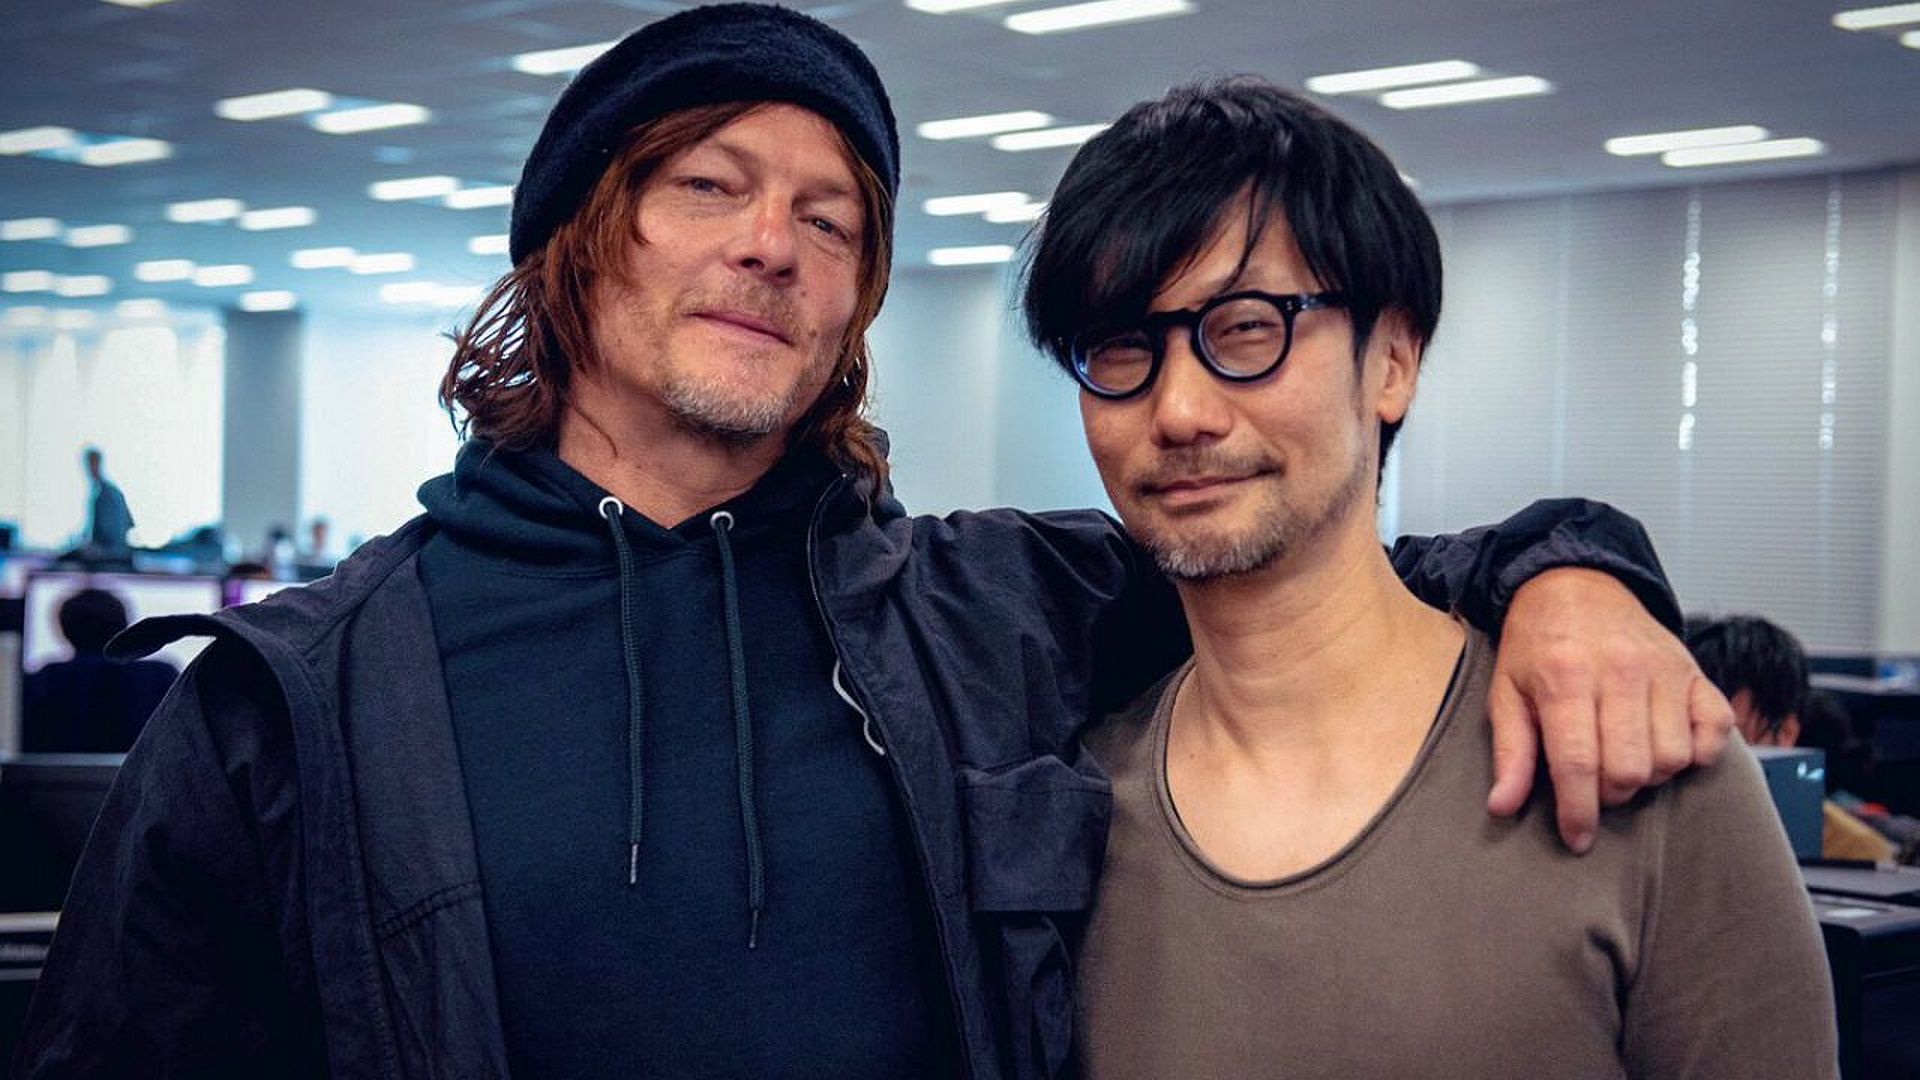 death stranding creator and protagonist